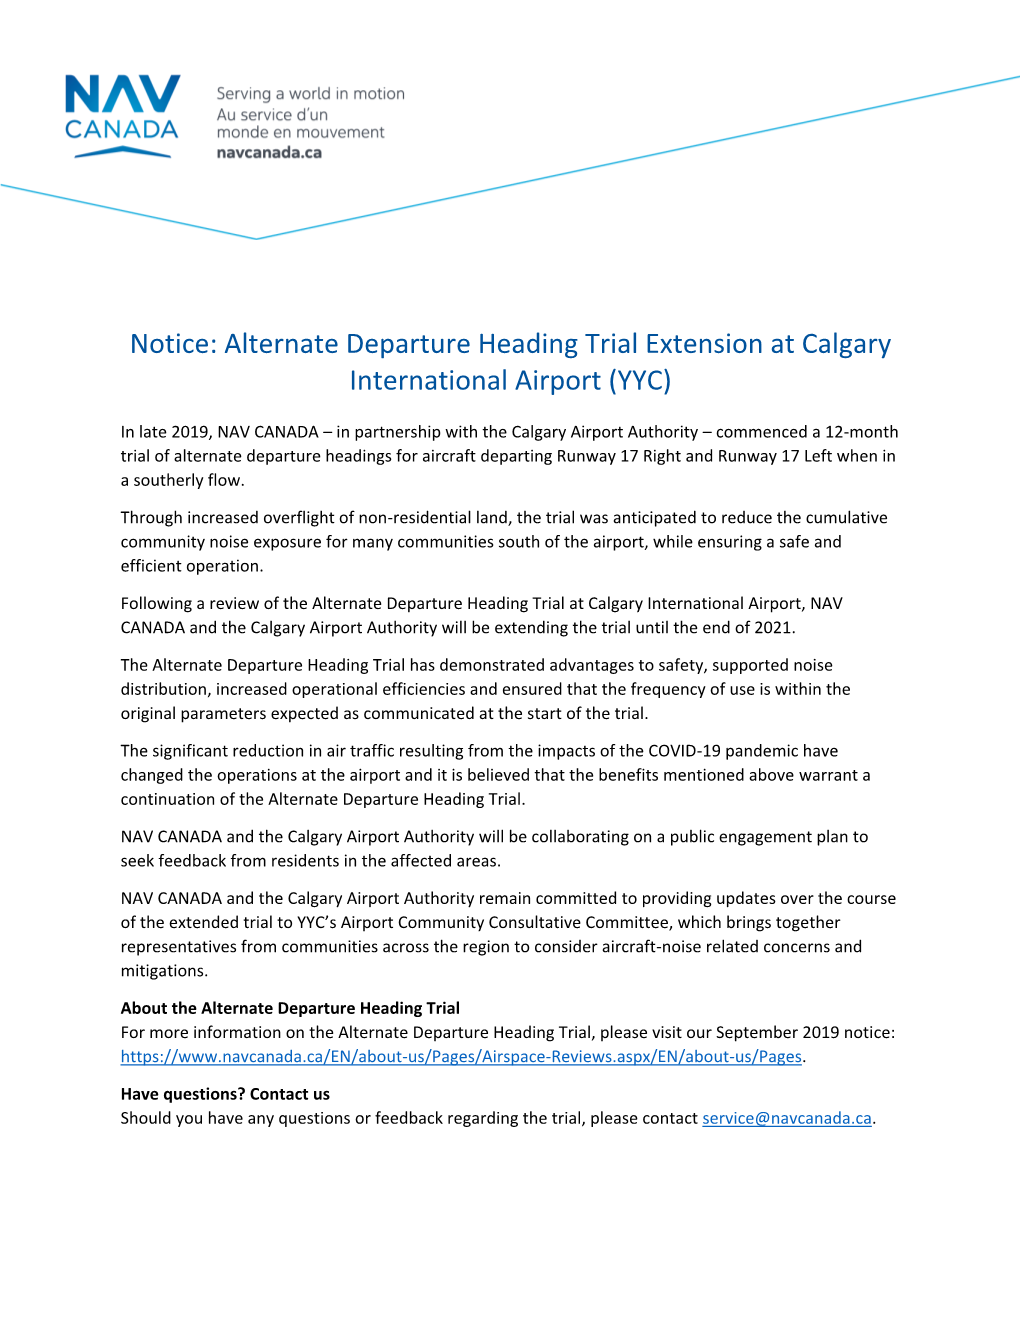 Notice: Alternate Departure Heading Trial Extension at Calgary International Airport (YYC)